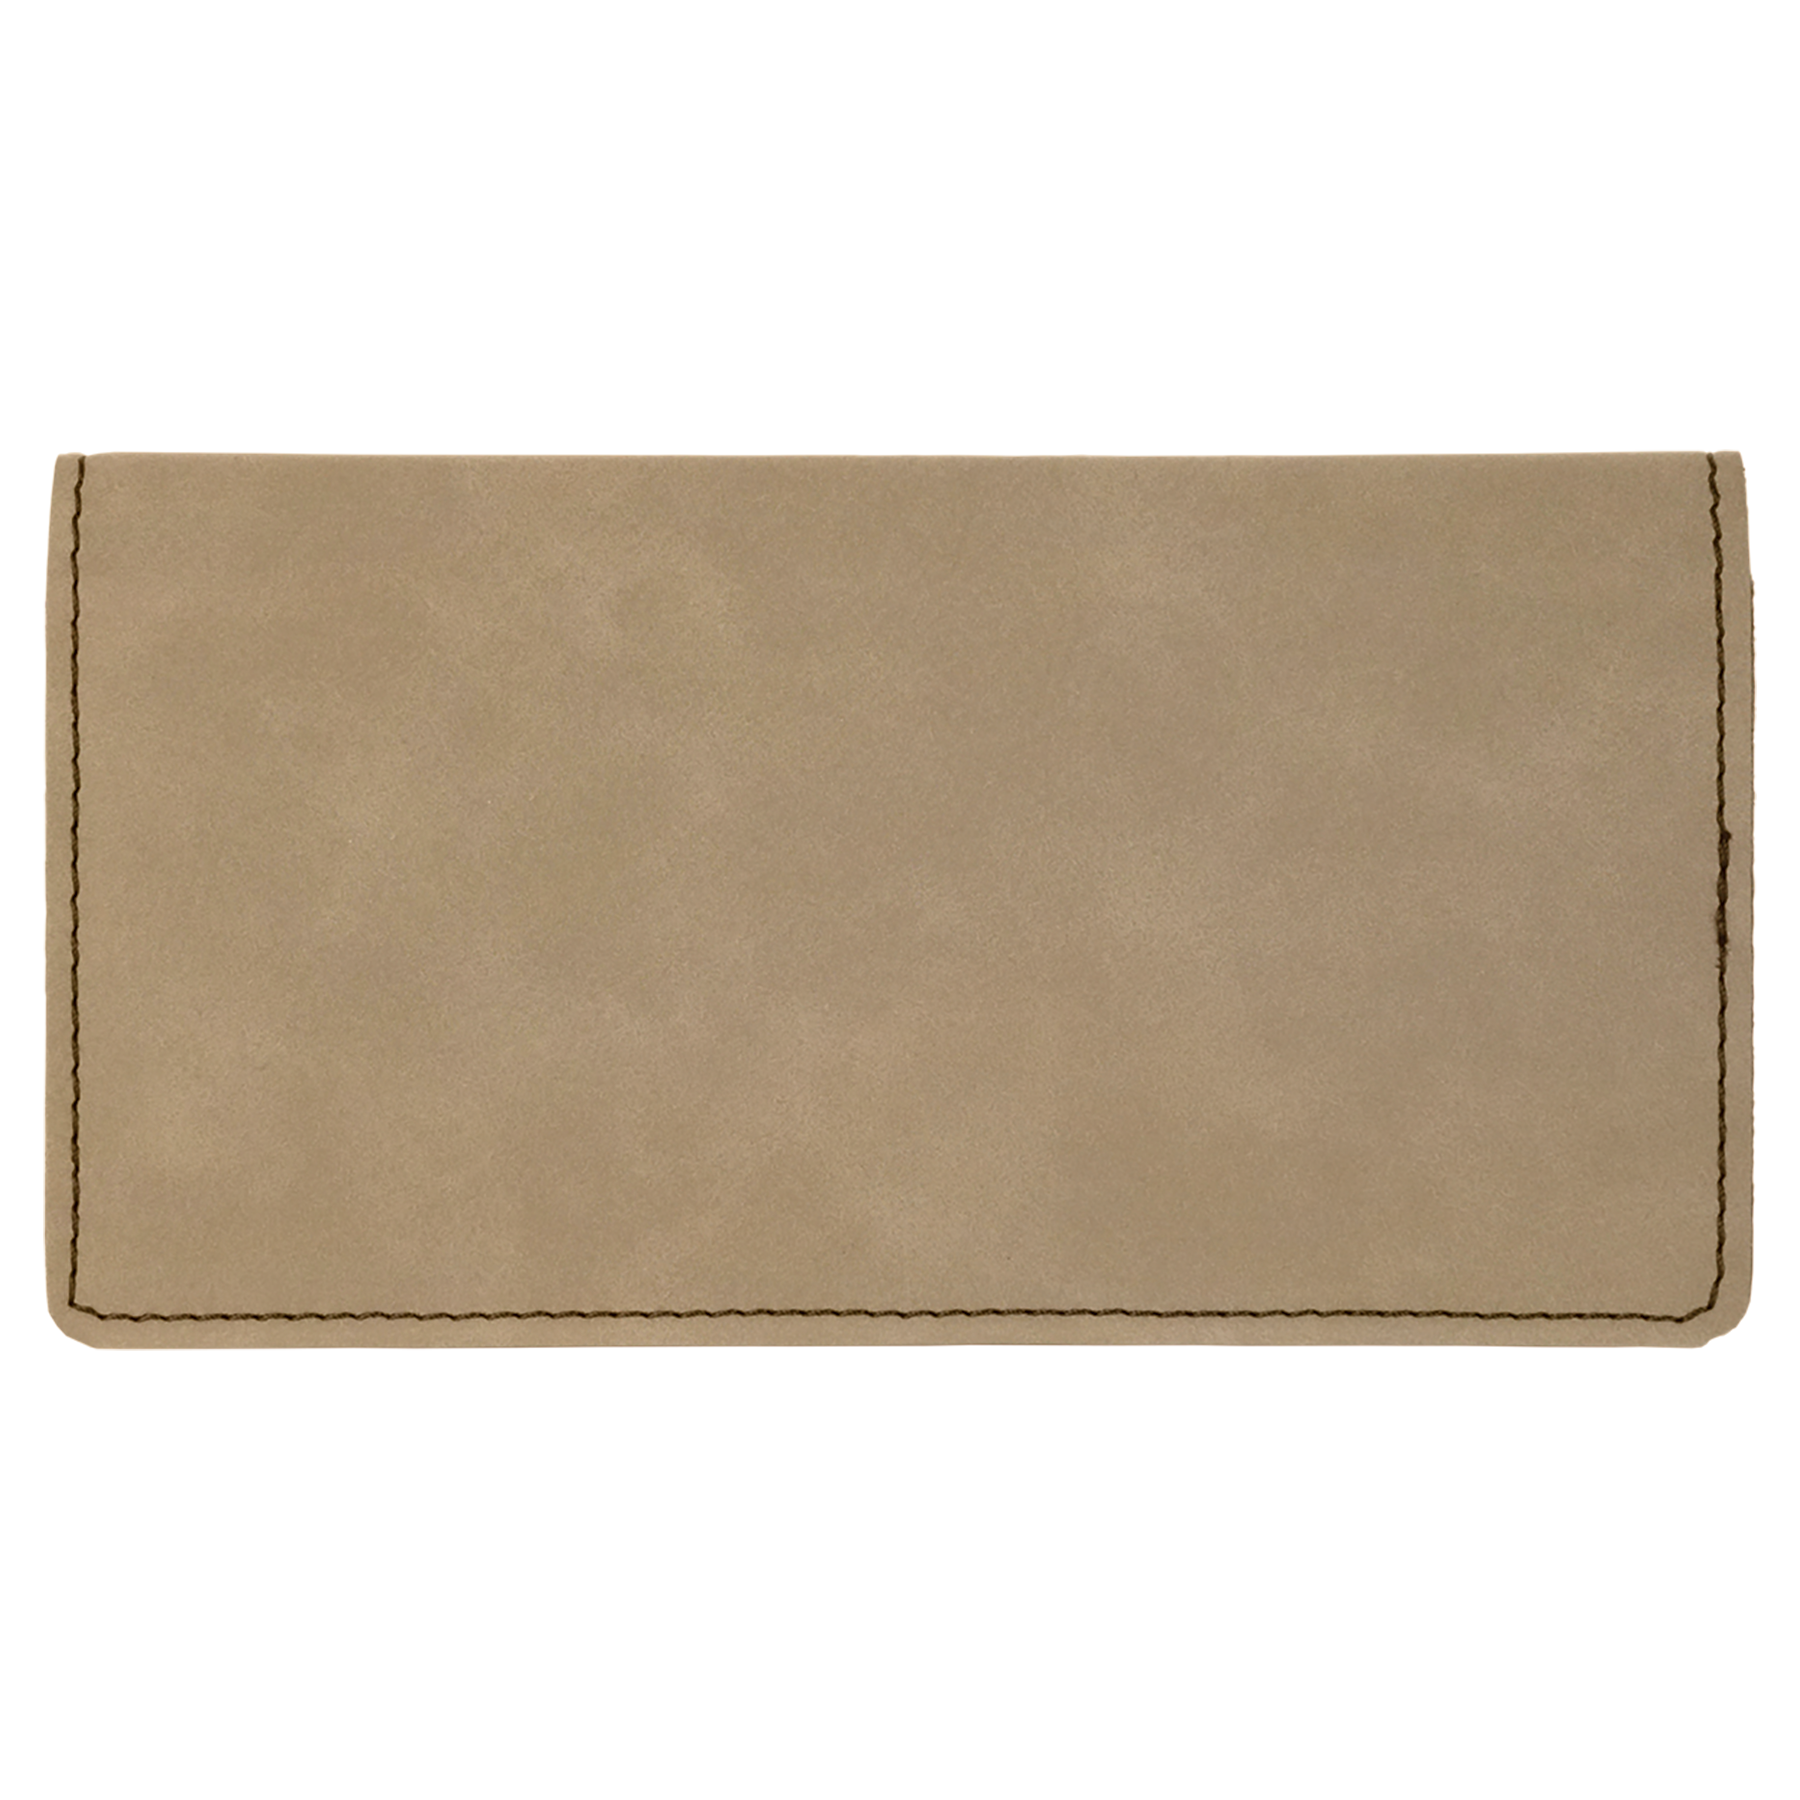 6 3/4" x 3 1/2" Laserable Leatherette Checkbook Cover